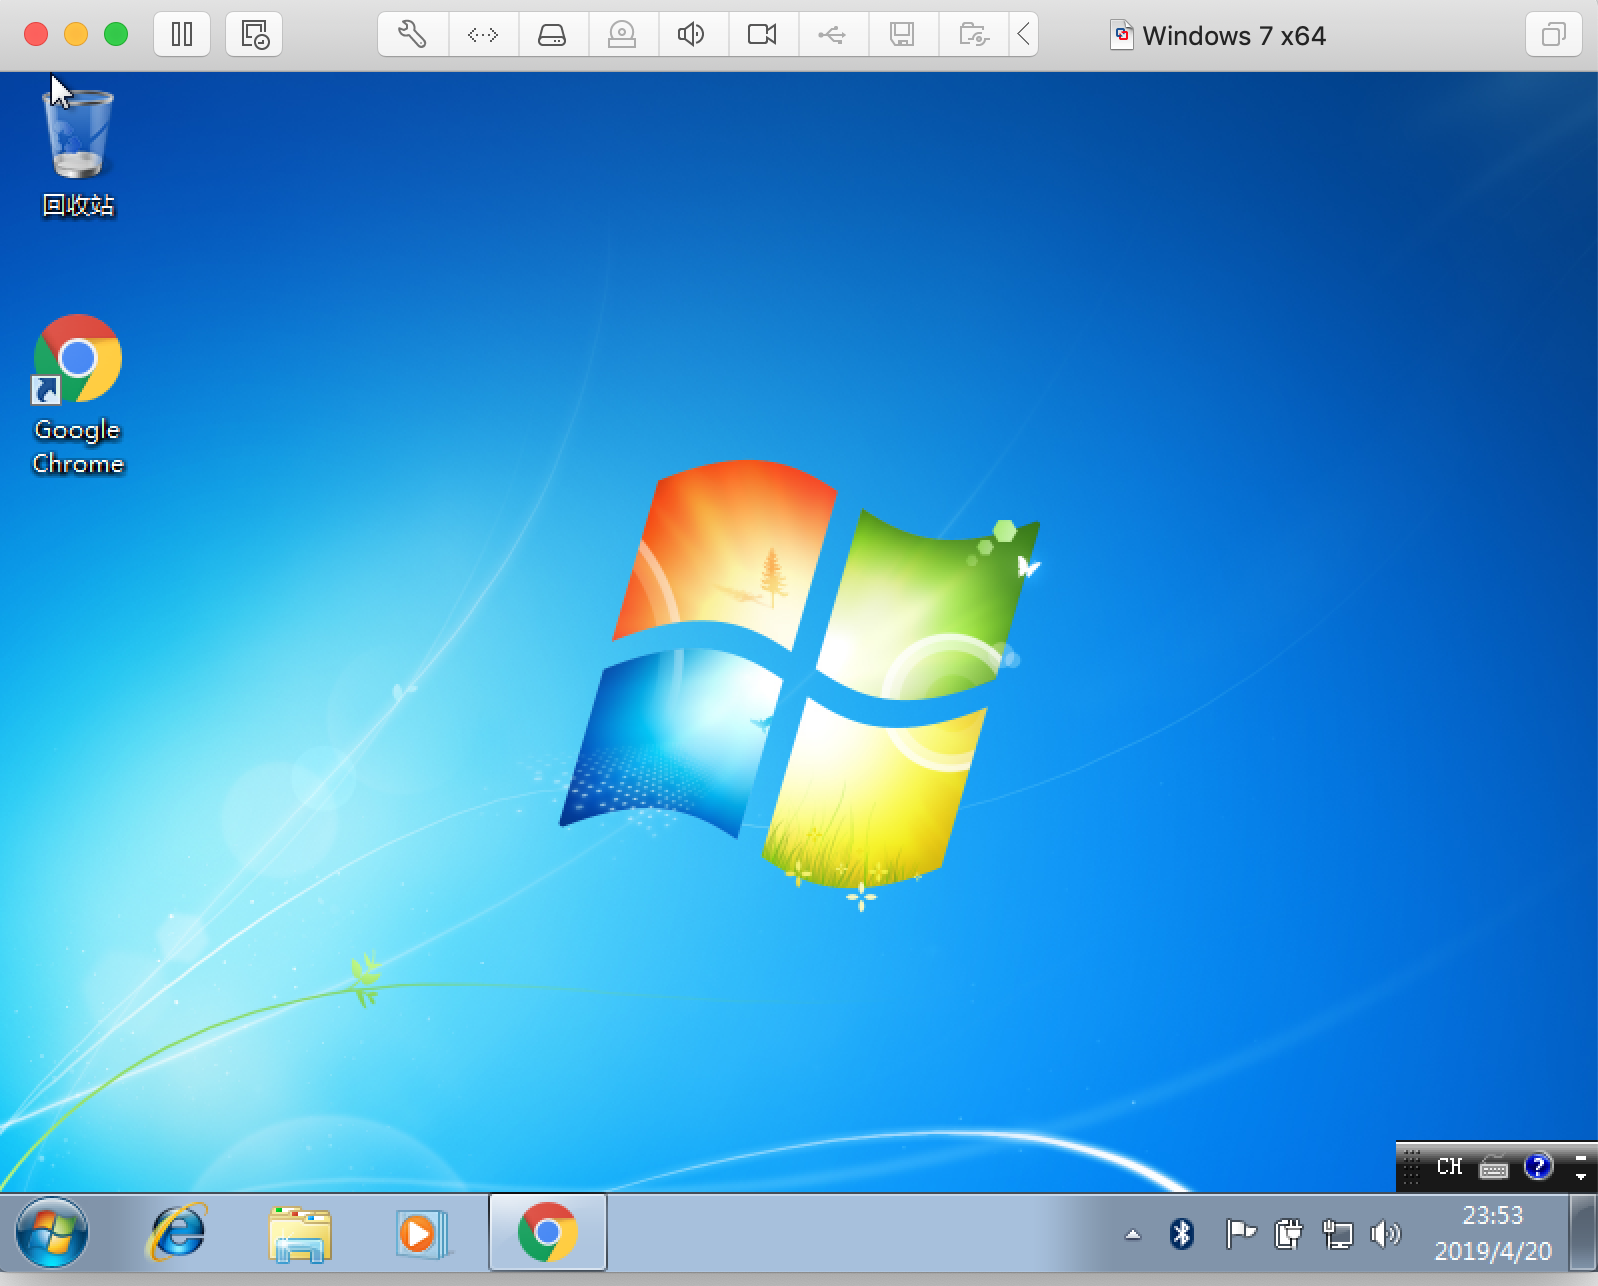 os-win7-new-install-success.png